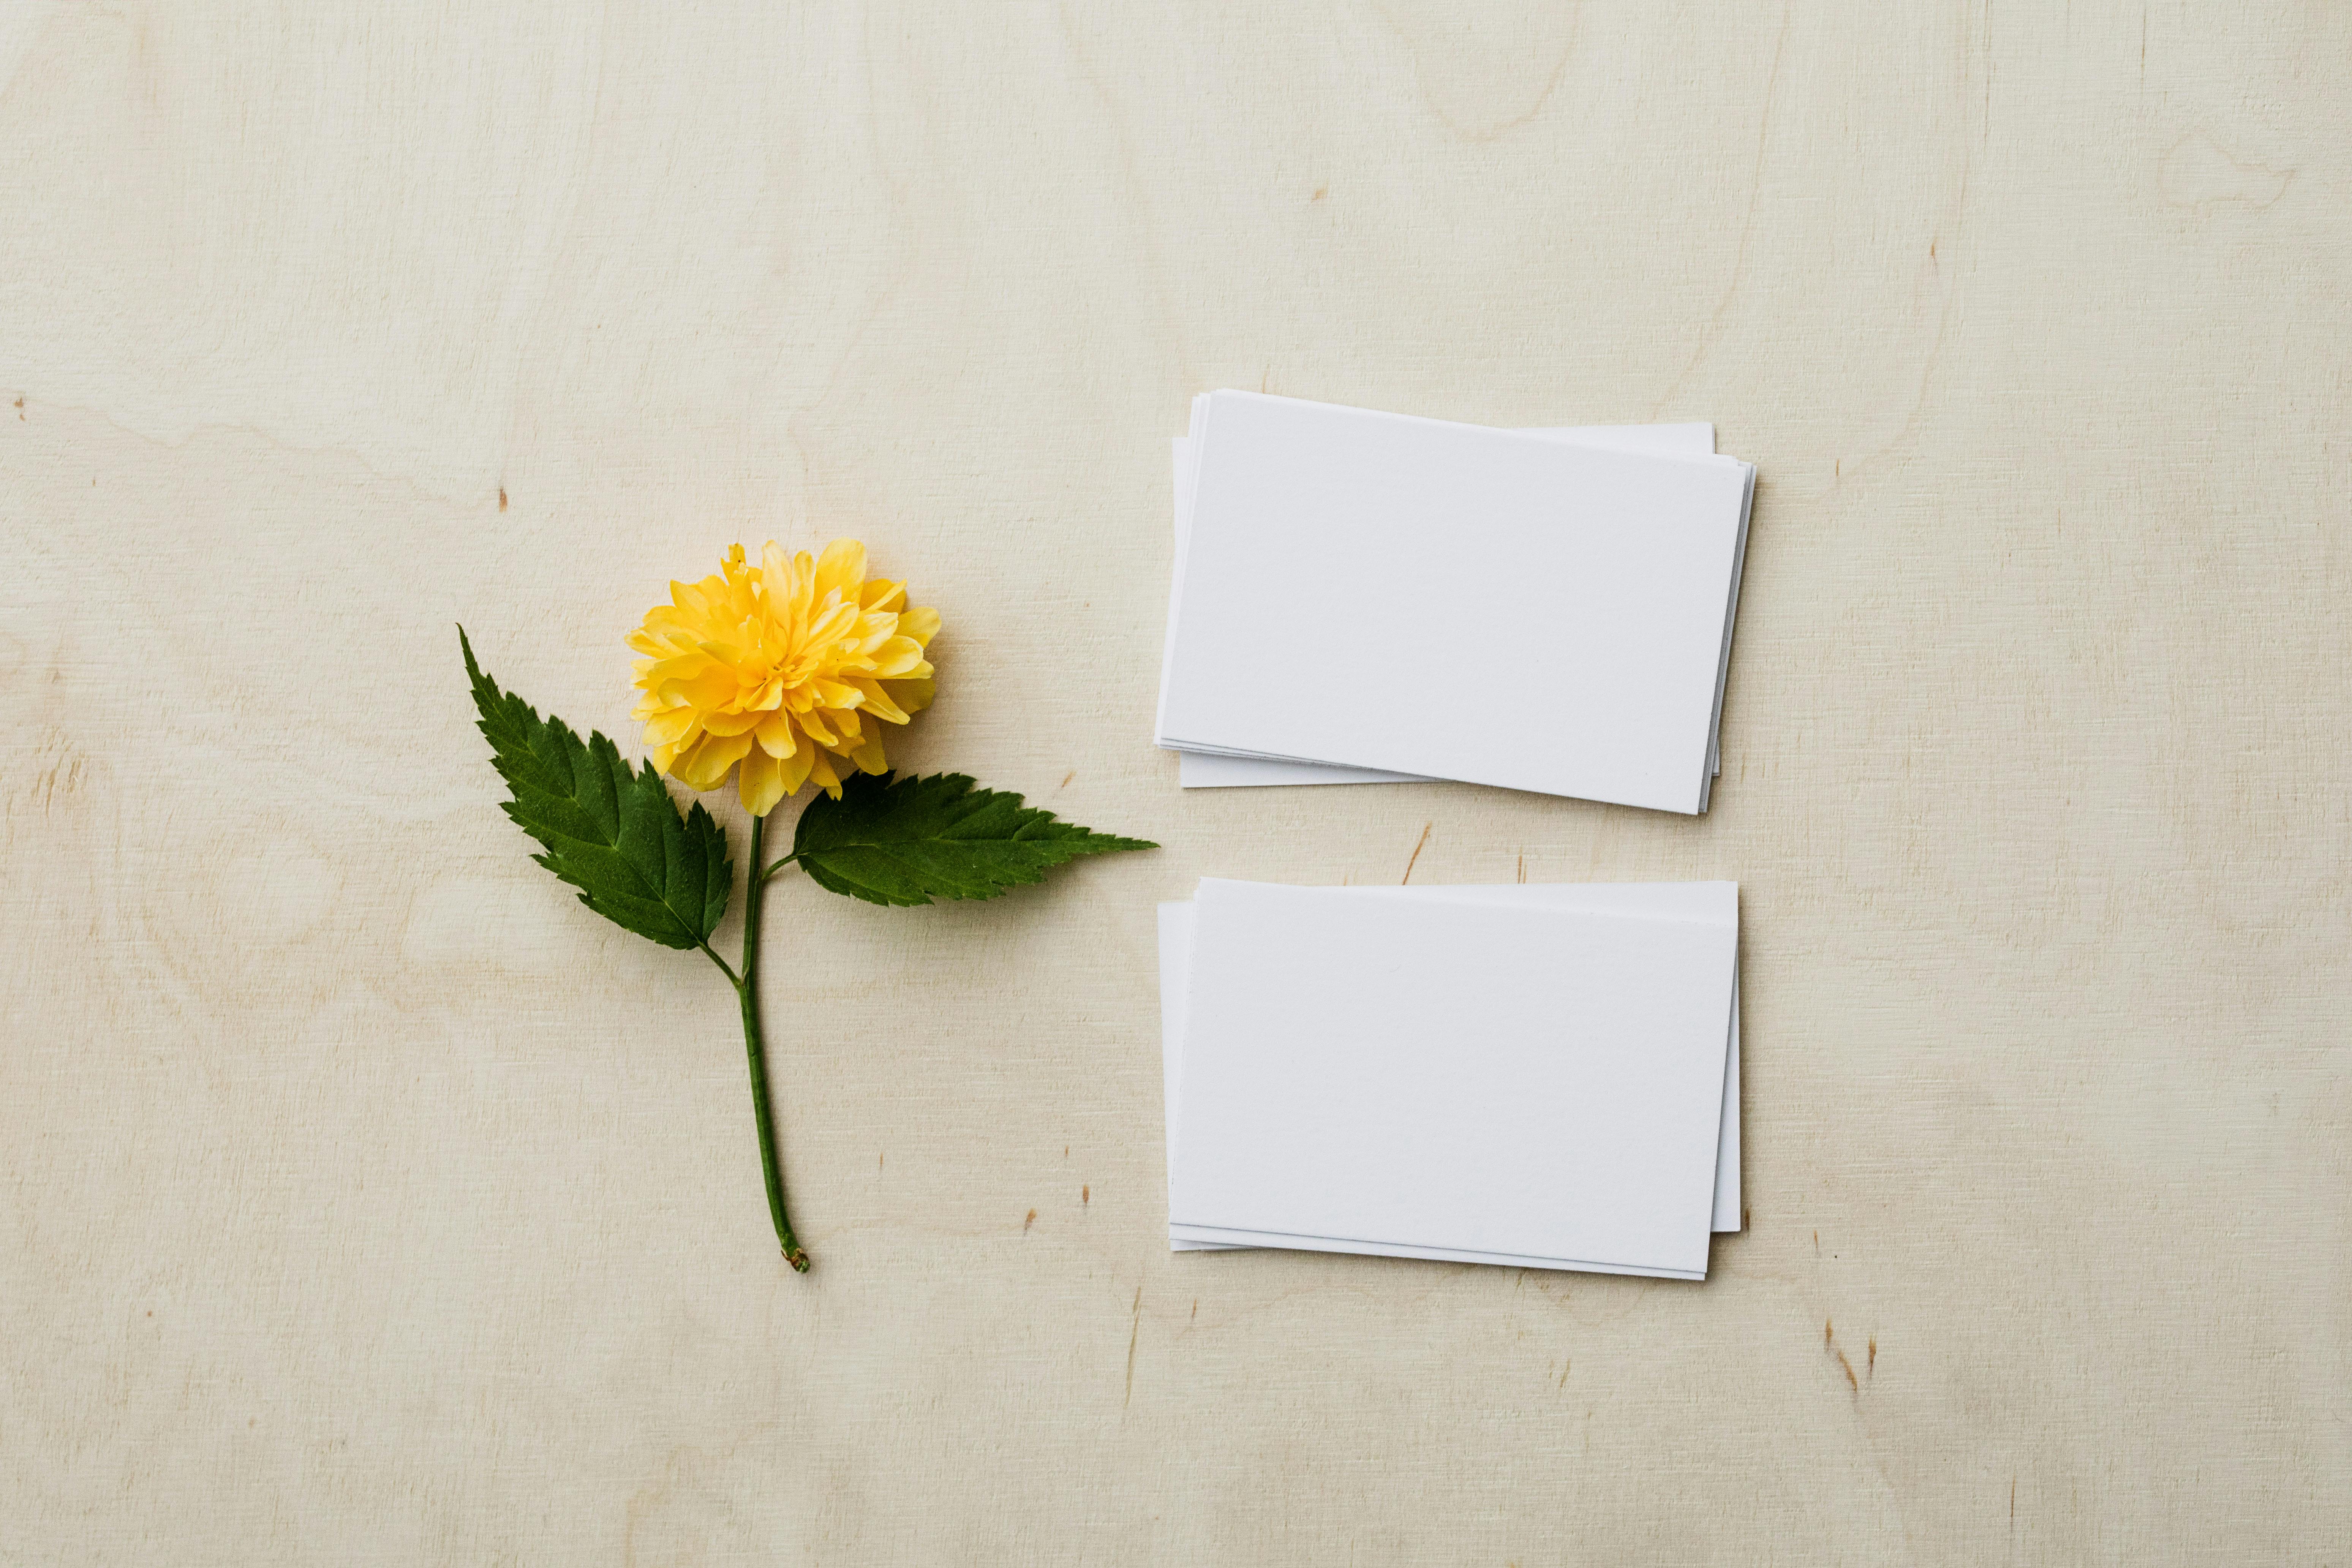 Download Blank Mockup Business Cards And Yellow Flower On Desk Free Stock Photo